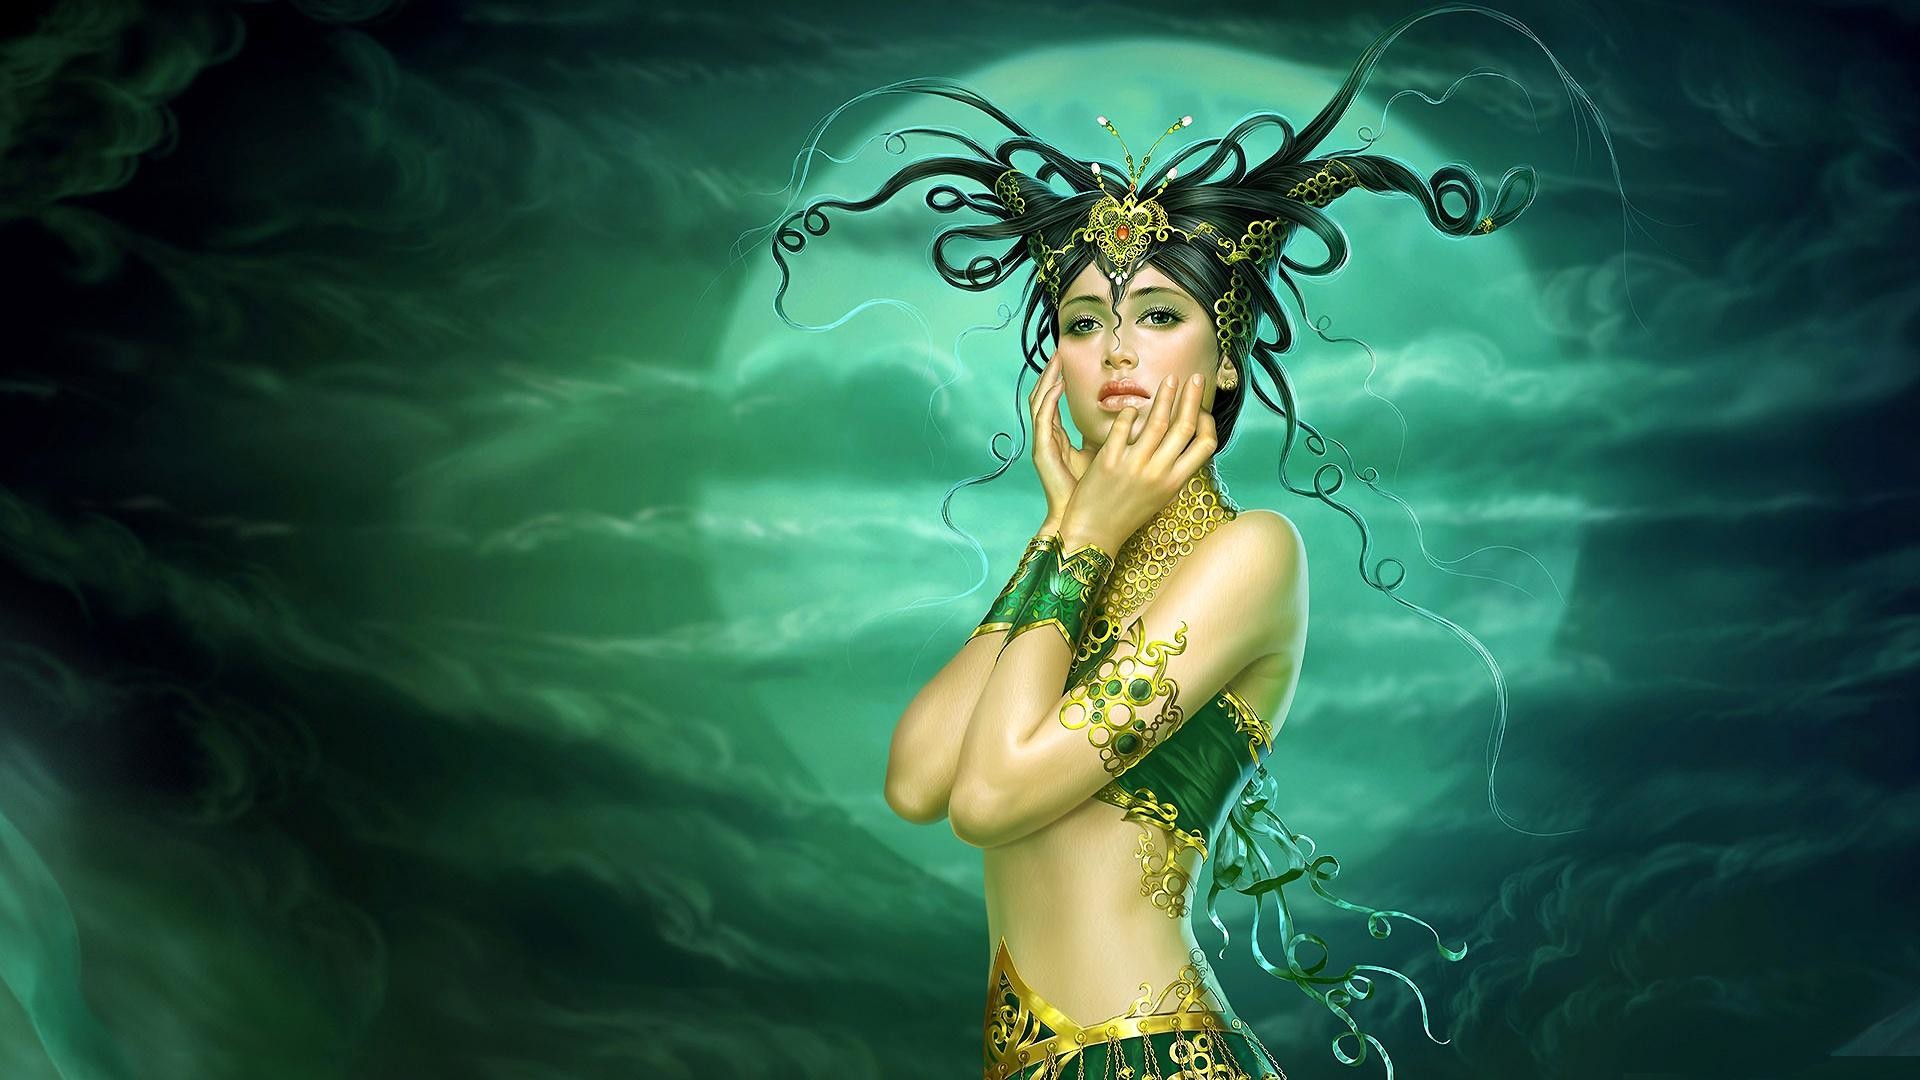 1920x1080 Fantasy Girl HD Wallpapers Group